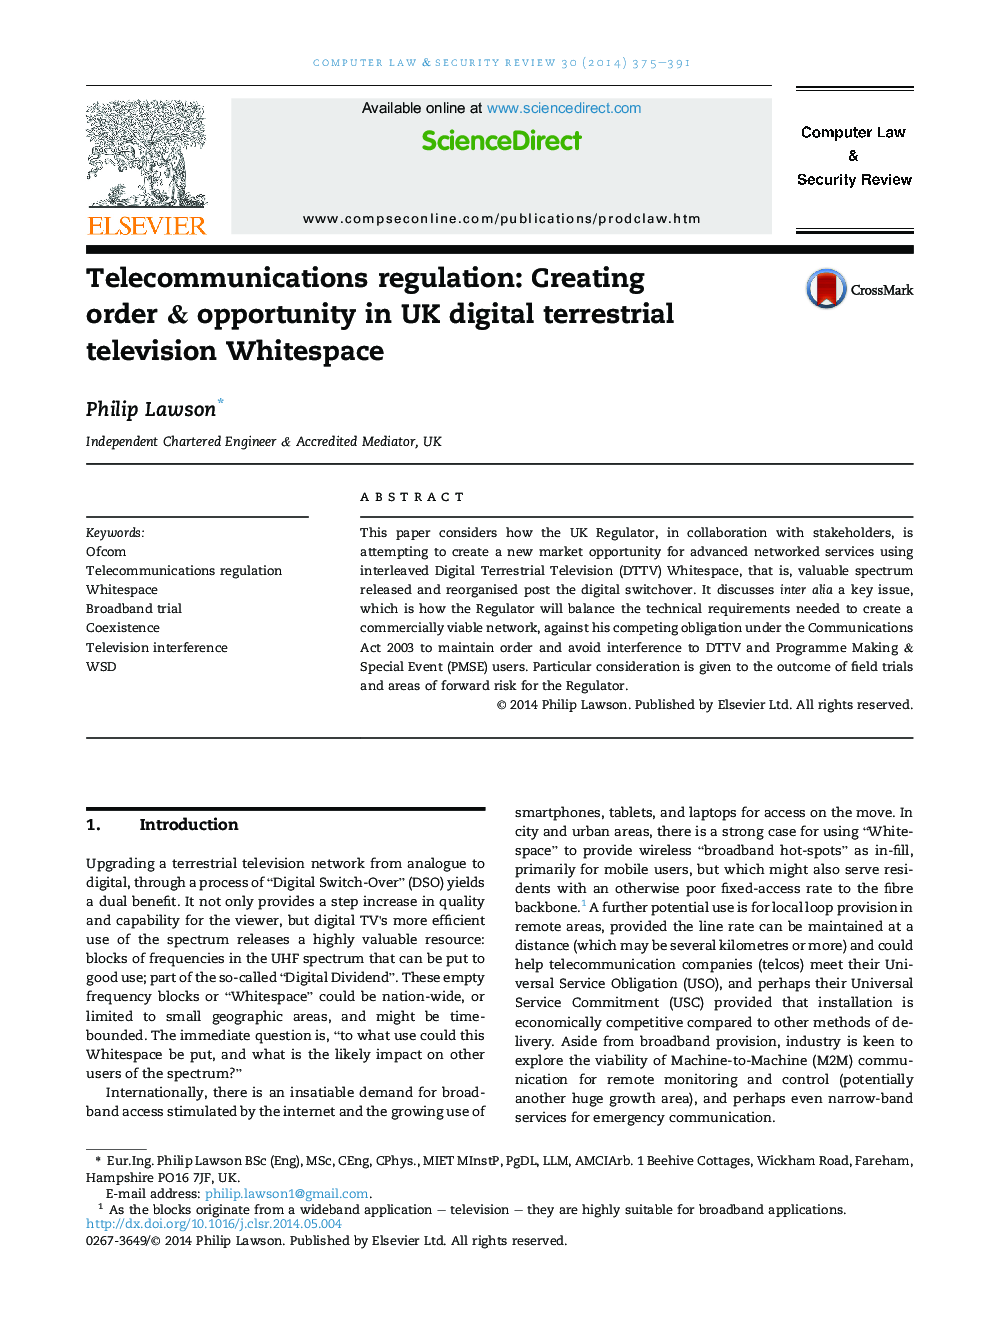 Telecommunications regulation: Creating order & opportunity in UK digital terrestrial television Whitespace